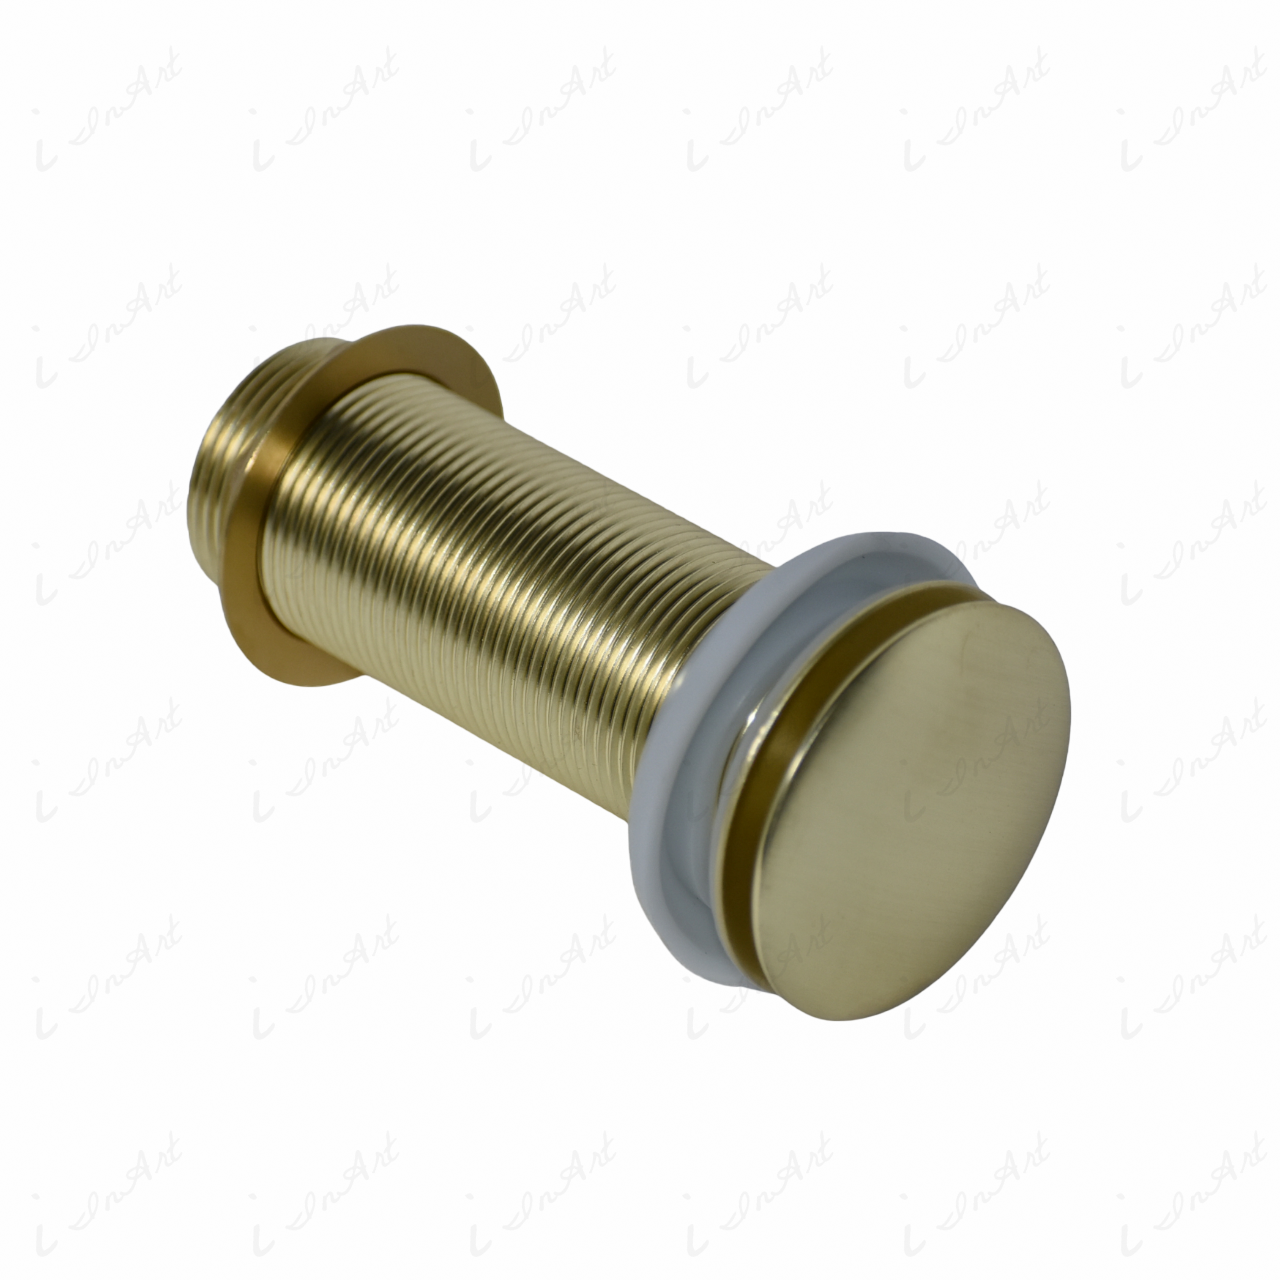 InArt Brass Full Threaded Pop Up Waste Coupling 32 MM 5", Brass Top (Gold) Satin Finish - InArt-Studio